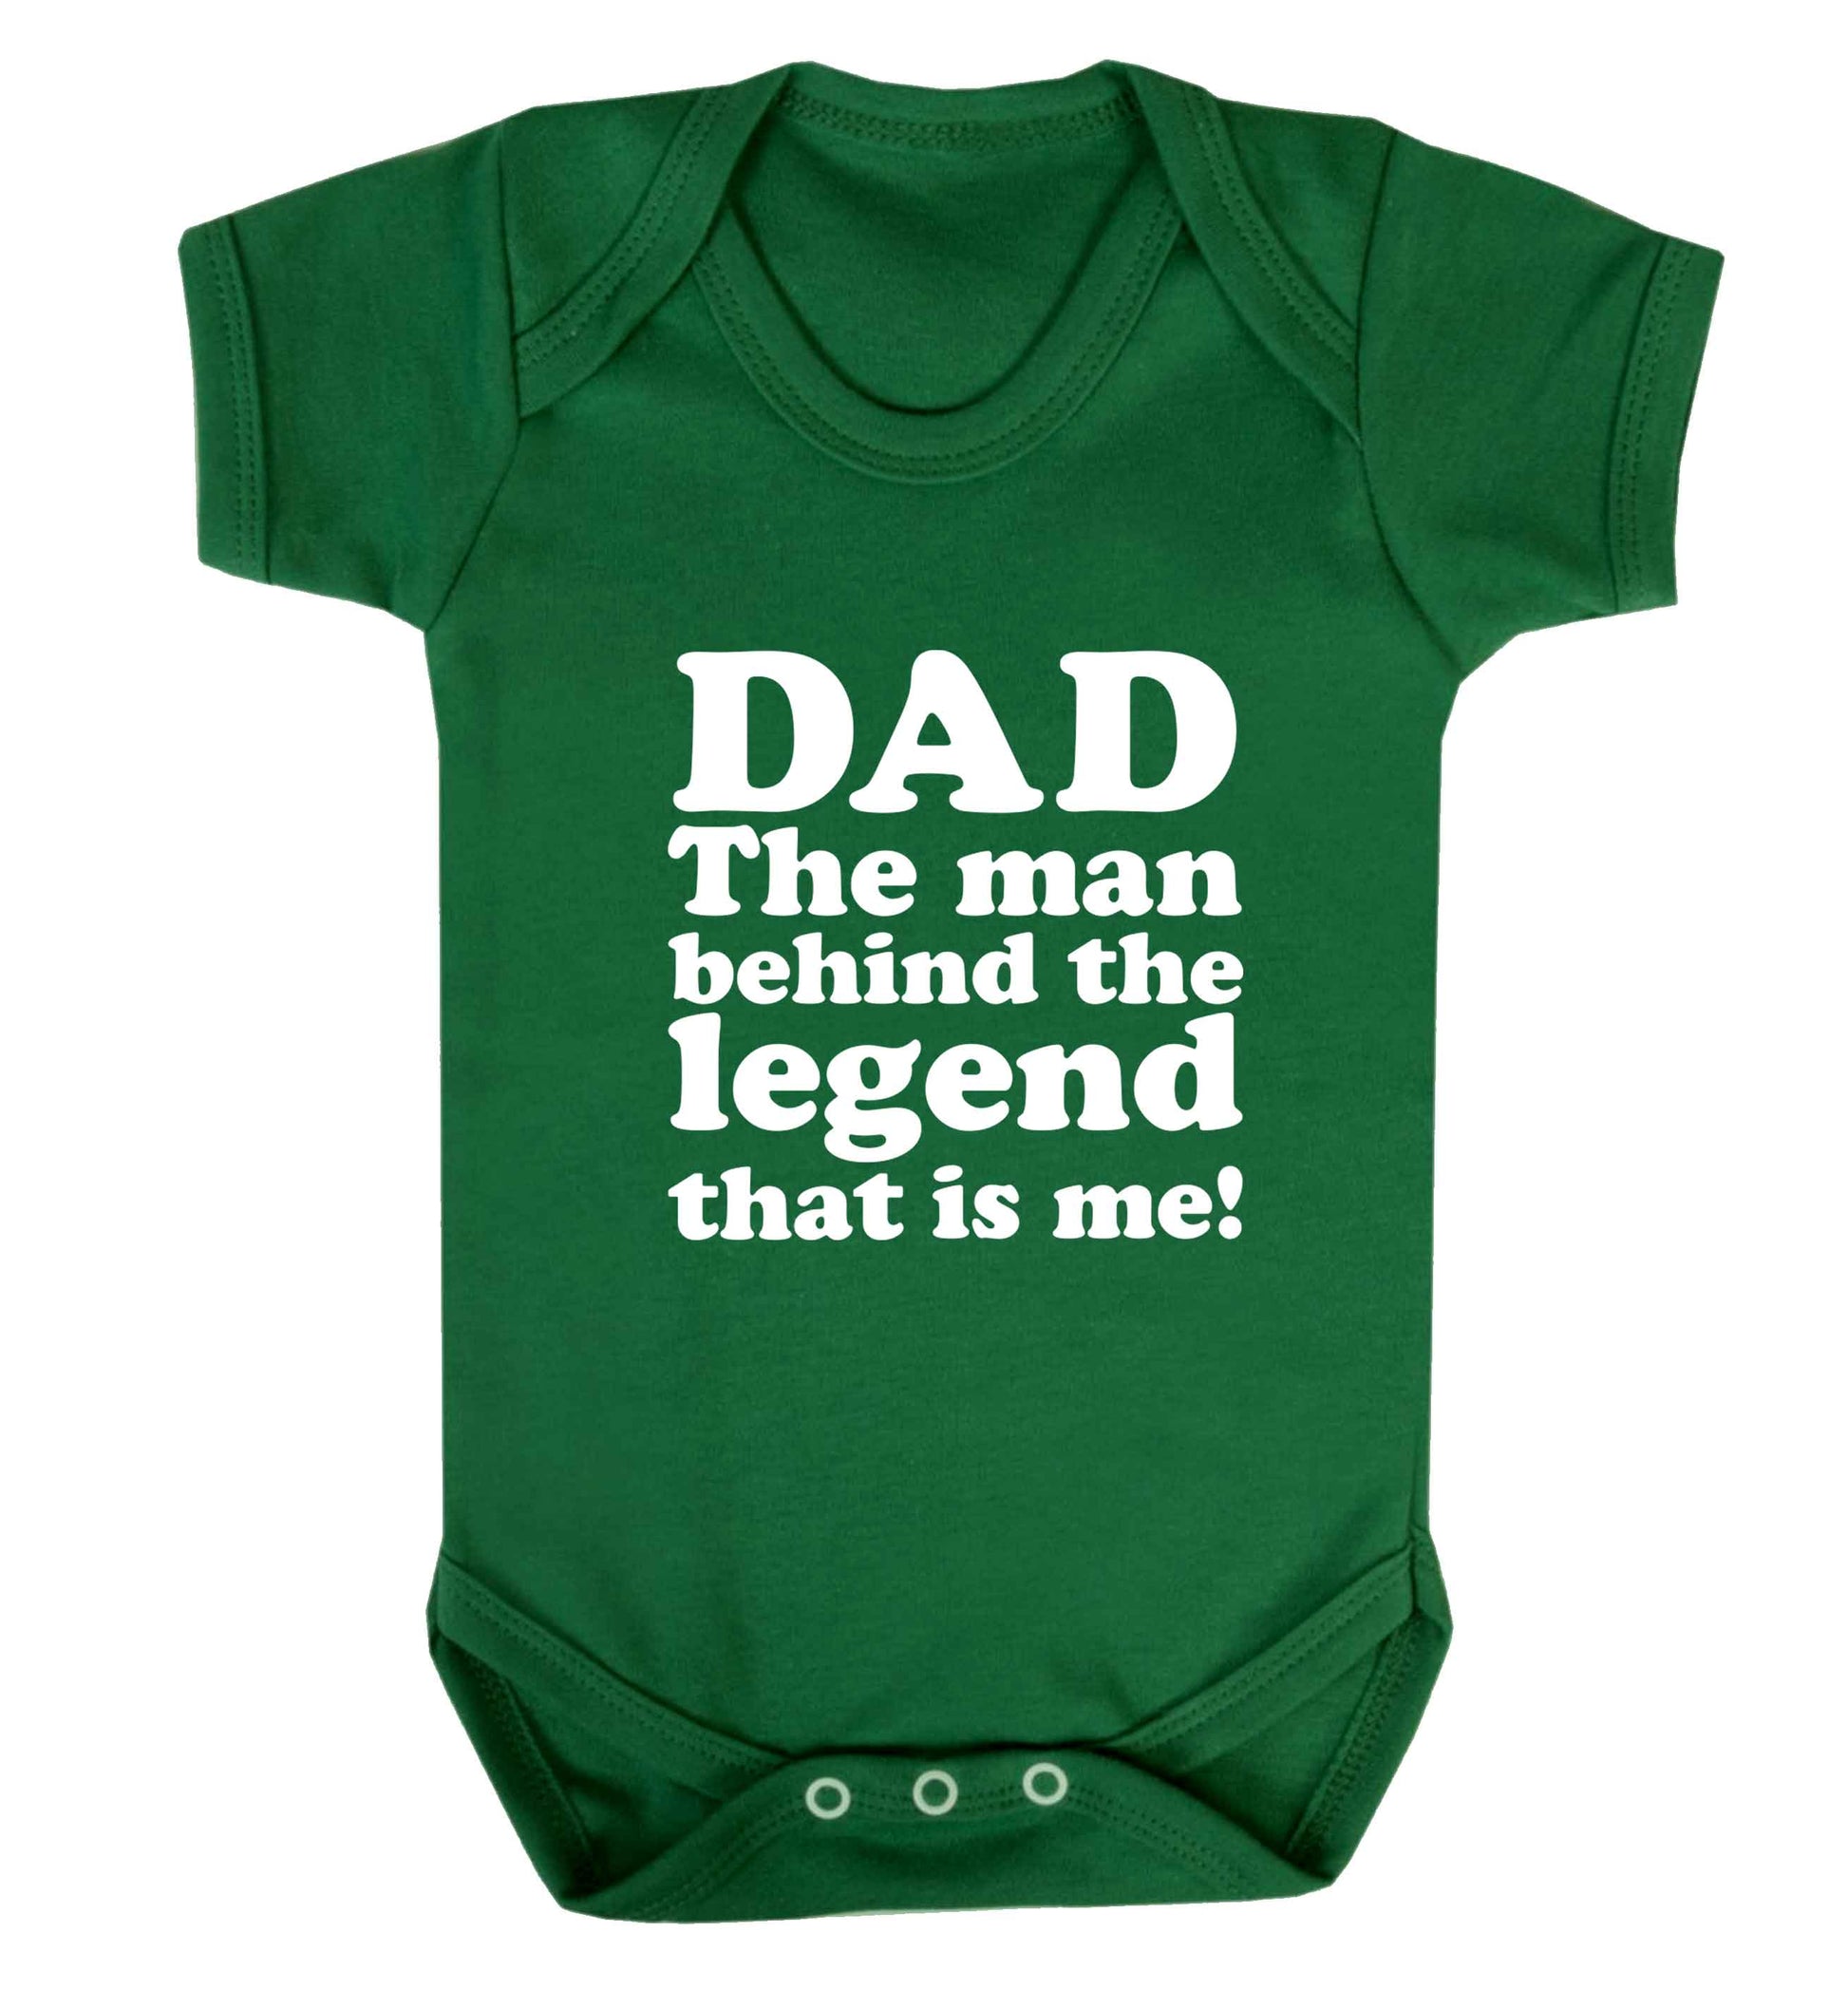 Dad the man behind the legend that is me baby vest green 18-24 months